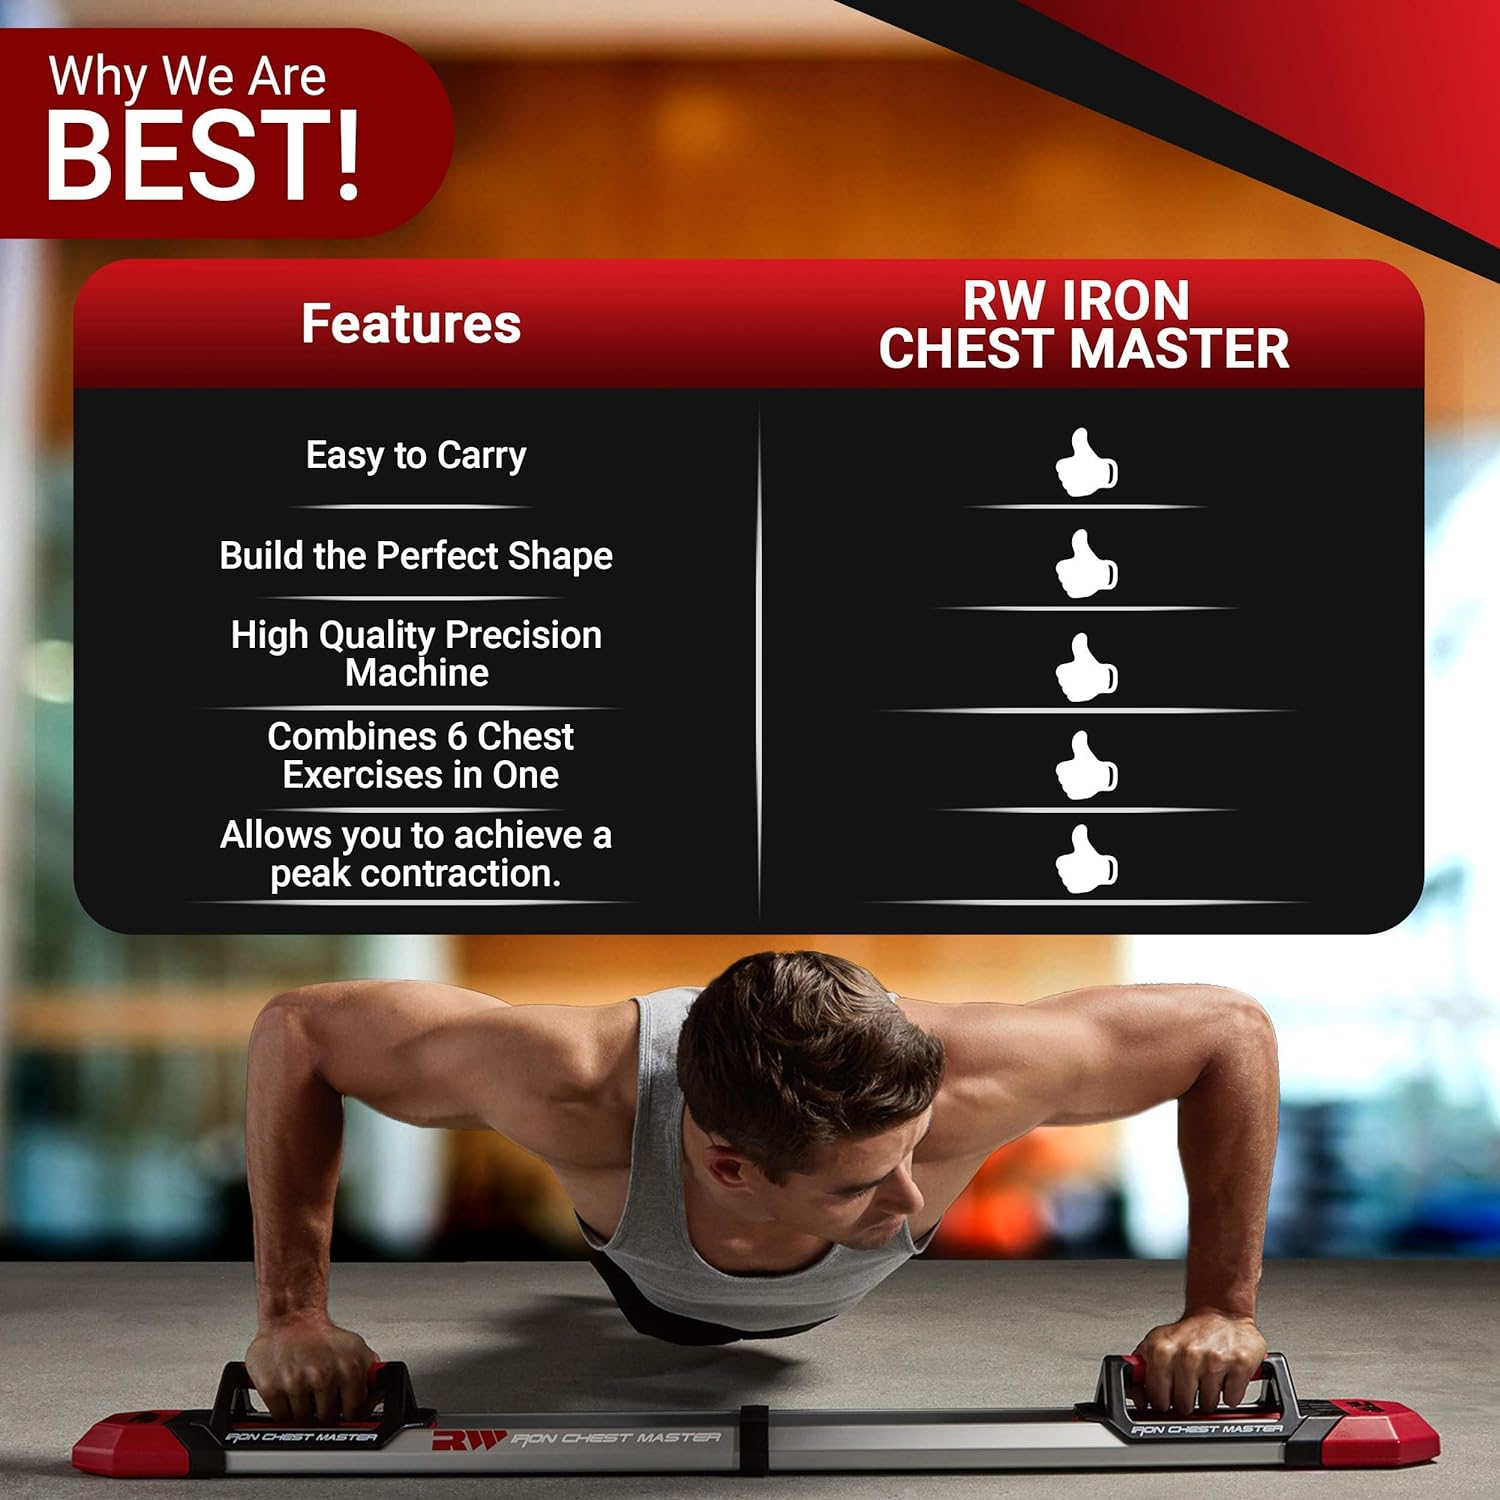 IRON CHEST MASTER Push Up Machine | At Home Fitness Equipment for Chest Workouts | Push Up Board Includes Resistance Bands and Unique Fitness Program